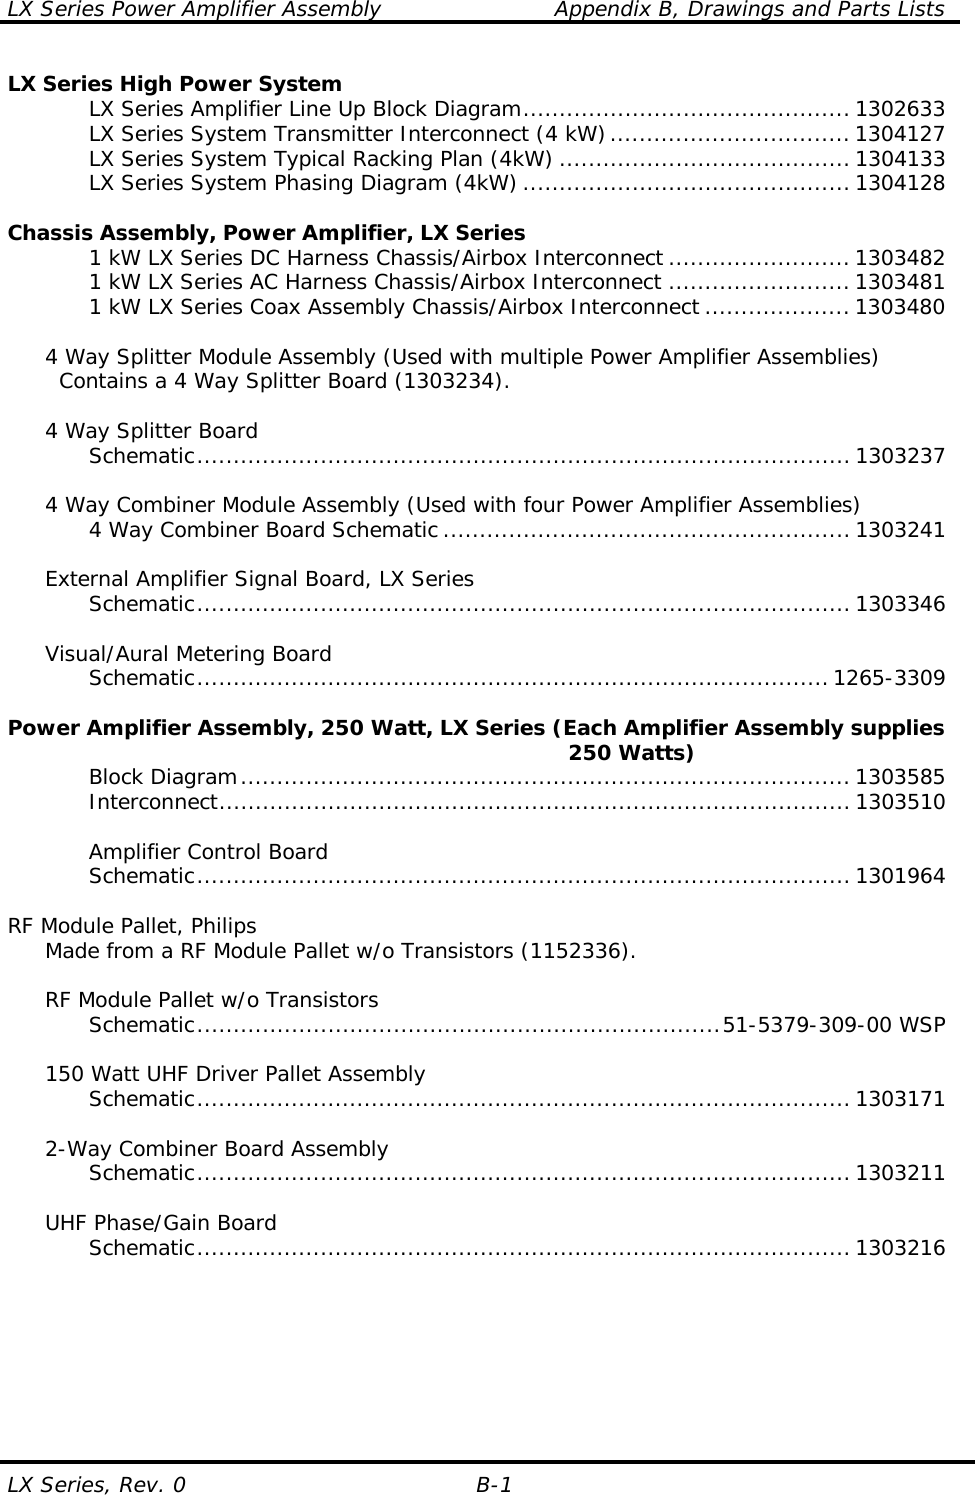 LX Series Power Amplifier Assembly   Appendix B, Drawings and Parts Lists LX Series, Rev. 0  B-1 LX Series High Power System     LX Series Amplifier Line Up Block Diagram............................................. 1302633     LX Series System Transmitter Interconnect (4 kW)................................. 1304127     LX Series System Typical Racking Plan (4kW) ........................................ 1304133     LX Series System Phasing Diagram (4kW) ............................................. 1304128     Chassis Assembly, Power Amplifier, LX Series     1 kW LX Series DC Harness Chassis/Airbox Interconnect ......................... 1303482     1 kW LX Series AC Harness Chassis/Airbox Interconnect .........................1303481     1 kW LX Series Coax Assembly Chassis/Airbox Interconnect .................... 1303480       4 Way Splitter Module Assembly (Used with multiple Power Amplifier Assemblies)     Contains a 4 Way Splitter Board (1303234).     4 Way Splitter Board    Schematic.......................................................................................... 1303237       4 Way Combiner Module Assembly (Used with four Power Amplifier Assemblies)     4 Way Combiner Board Schematic ........................................................ 1303241       External Amplifier Signal Board, LX Series    Schematic.......................................................................................... 1303346       Visual/Aural Metering Board    Schematic.......................................................................................1265-3309     Power Amplifier Assembly, 250 Watt, LX Series (Each Amplifier Assembly supplies                                                                            250 Watts)    Block Diagram.................................................................................... 1303585    Interconnect....................................................................................... 1303510         Amplifier Control Board    Schematic.......................................................................................... 1301964     RF Module Pallet, Philips   Made from a RF Module Pallet w/o Transistors (1152336).       RF Module Pallet w/o Transistors    Schematic........................................................................51-5379-309-00 WSP       150 Watt UHF Driver Pallet Assembly    Schematic.......................................................................................... 1303171       2-Way Combiner Board Assembly    Schematic.......................................................................................... 1303211       UHF Phase/Gain Board    Schematic.......................................................................................... 1303216          